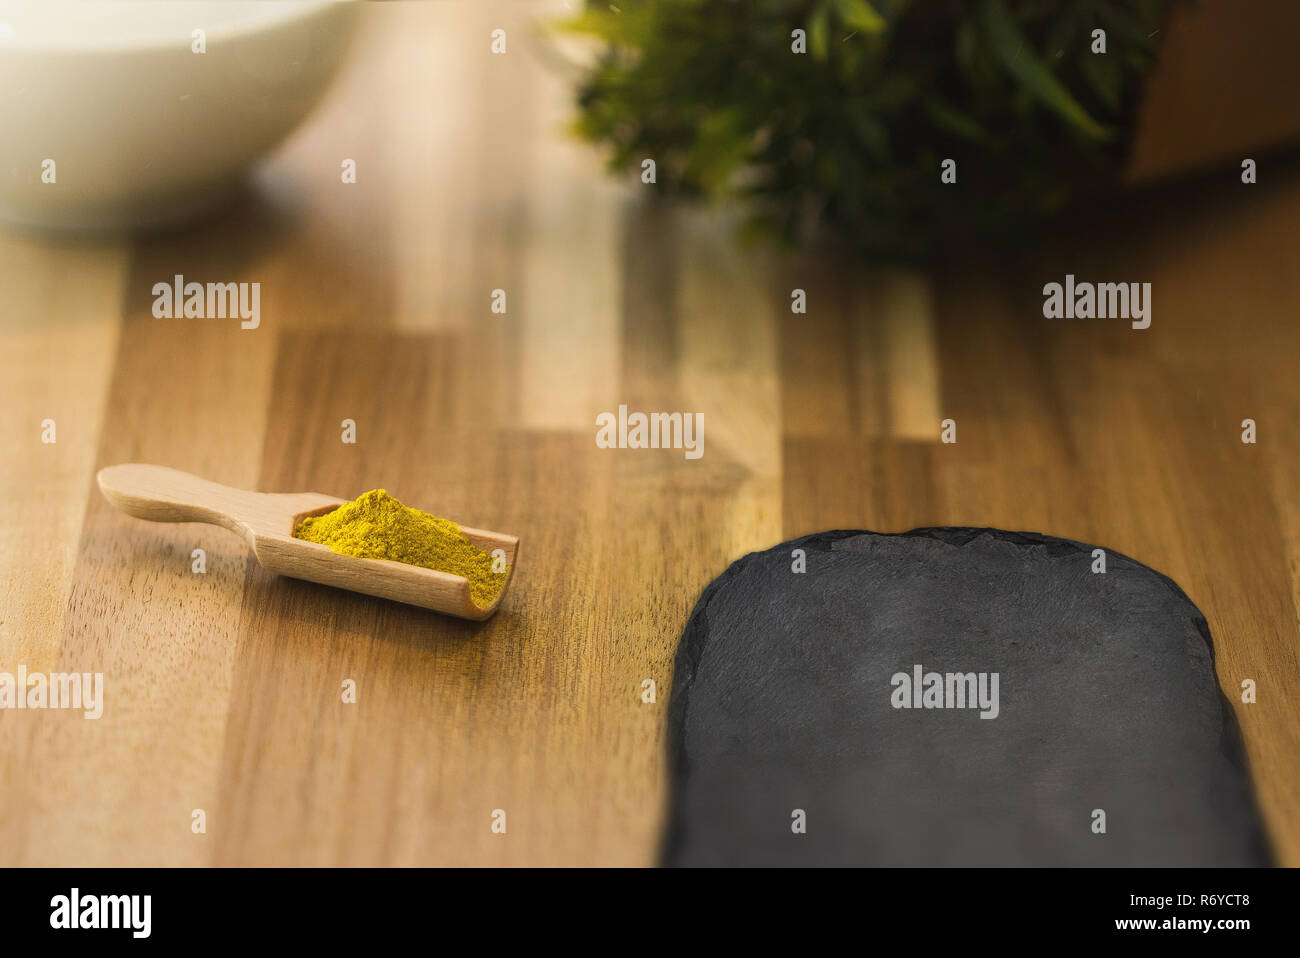 Curry spice powder and herbs on a wooden spoon. Ingredients for cooking and seasoning. Stock Photo